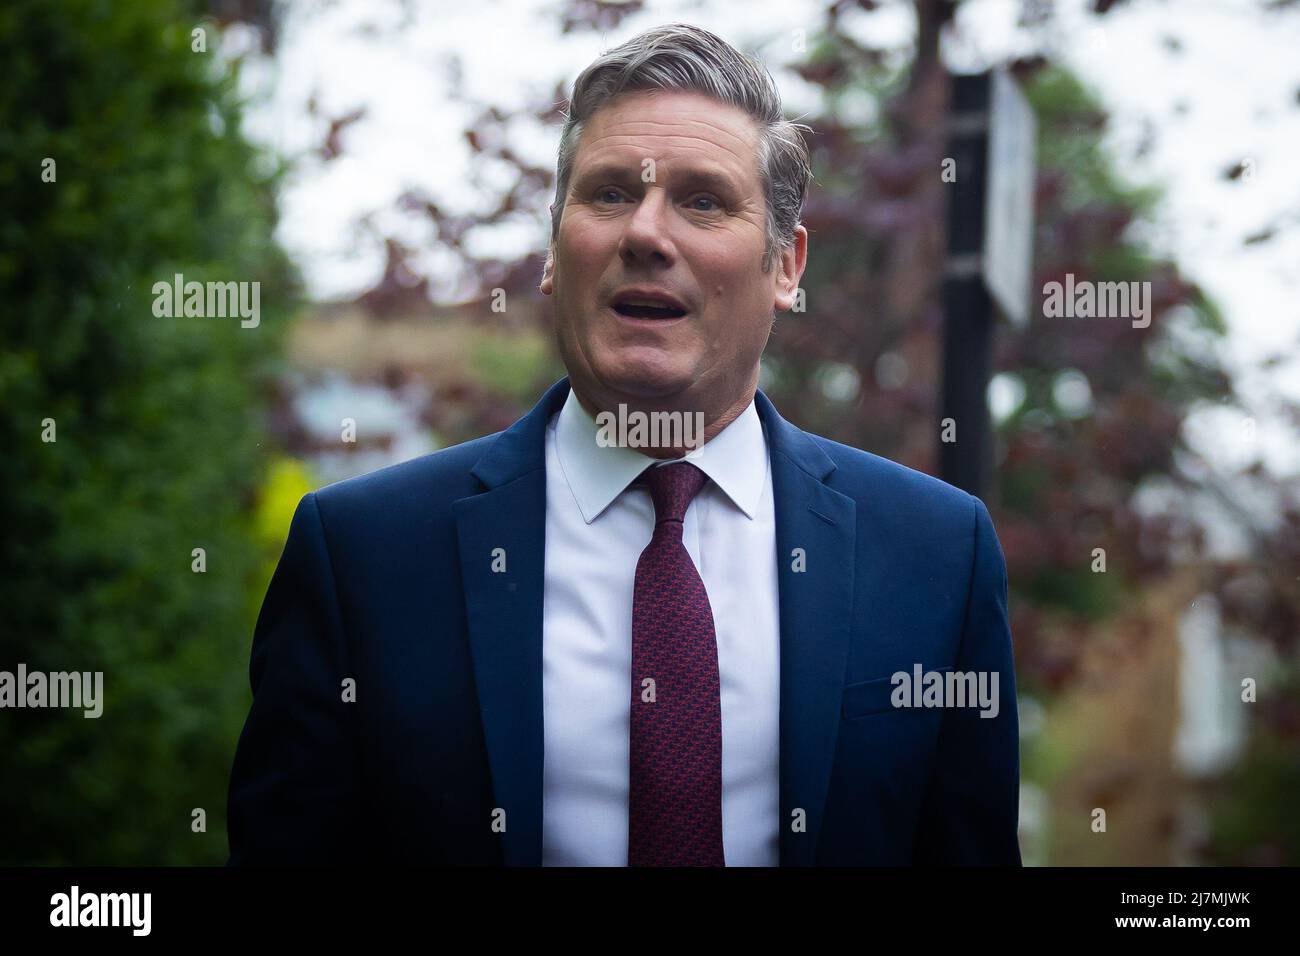 Sir Keir Starmer leaves his home ahead of the State Opening of Parliament. The Labour Leader said he will step down if the police fine him for breaking covid lockdown rules. Stock Photo